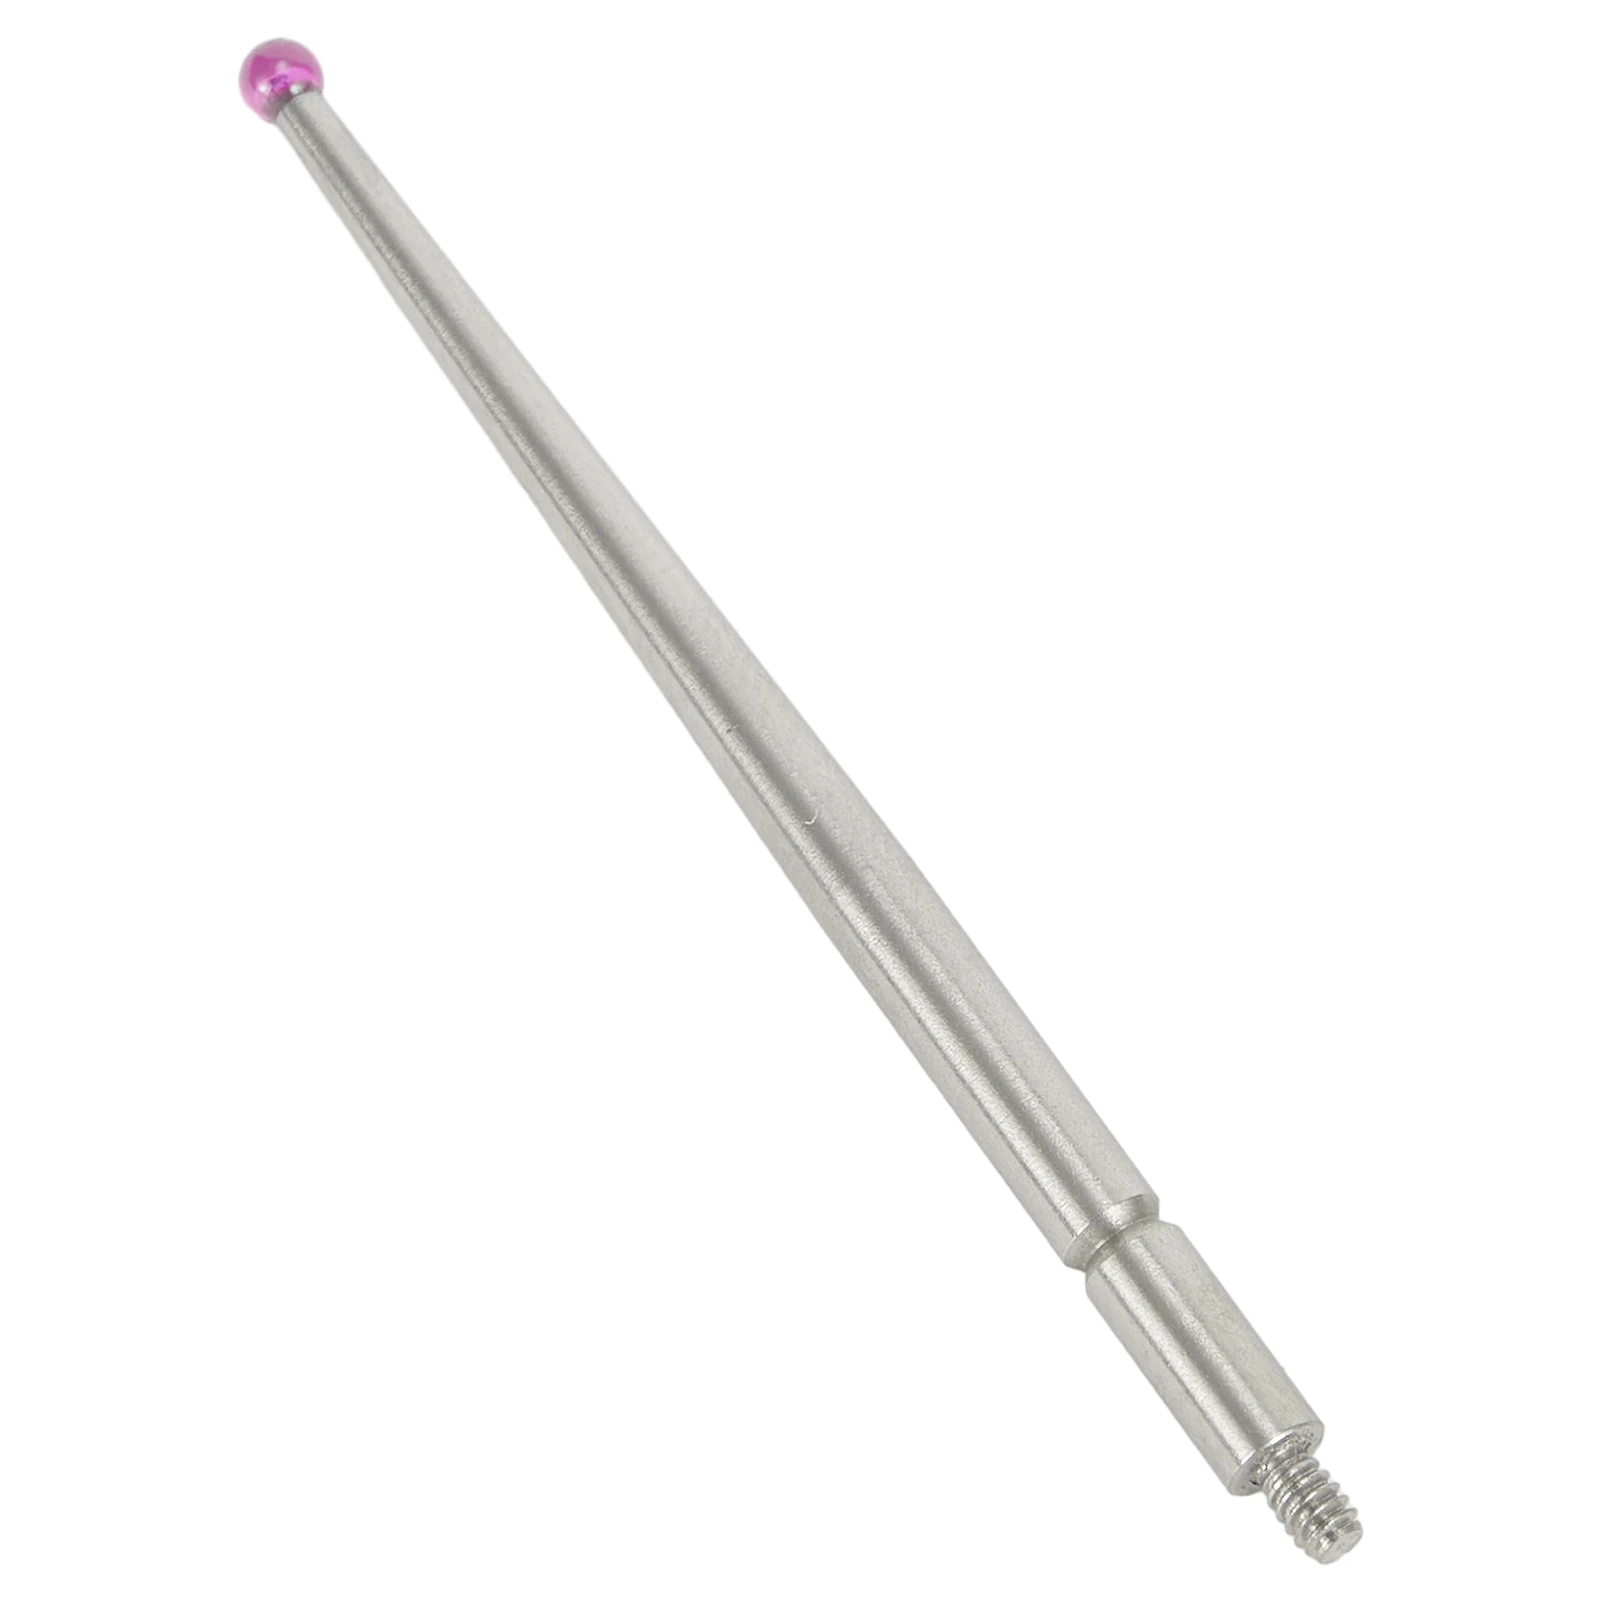 Contact Points Probe For Dial Test Indicator M1.6 Threaded Shank 2mm Diameter Ru By Ball For 513-115 For 513-215F